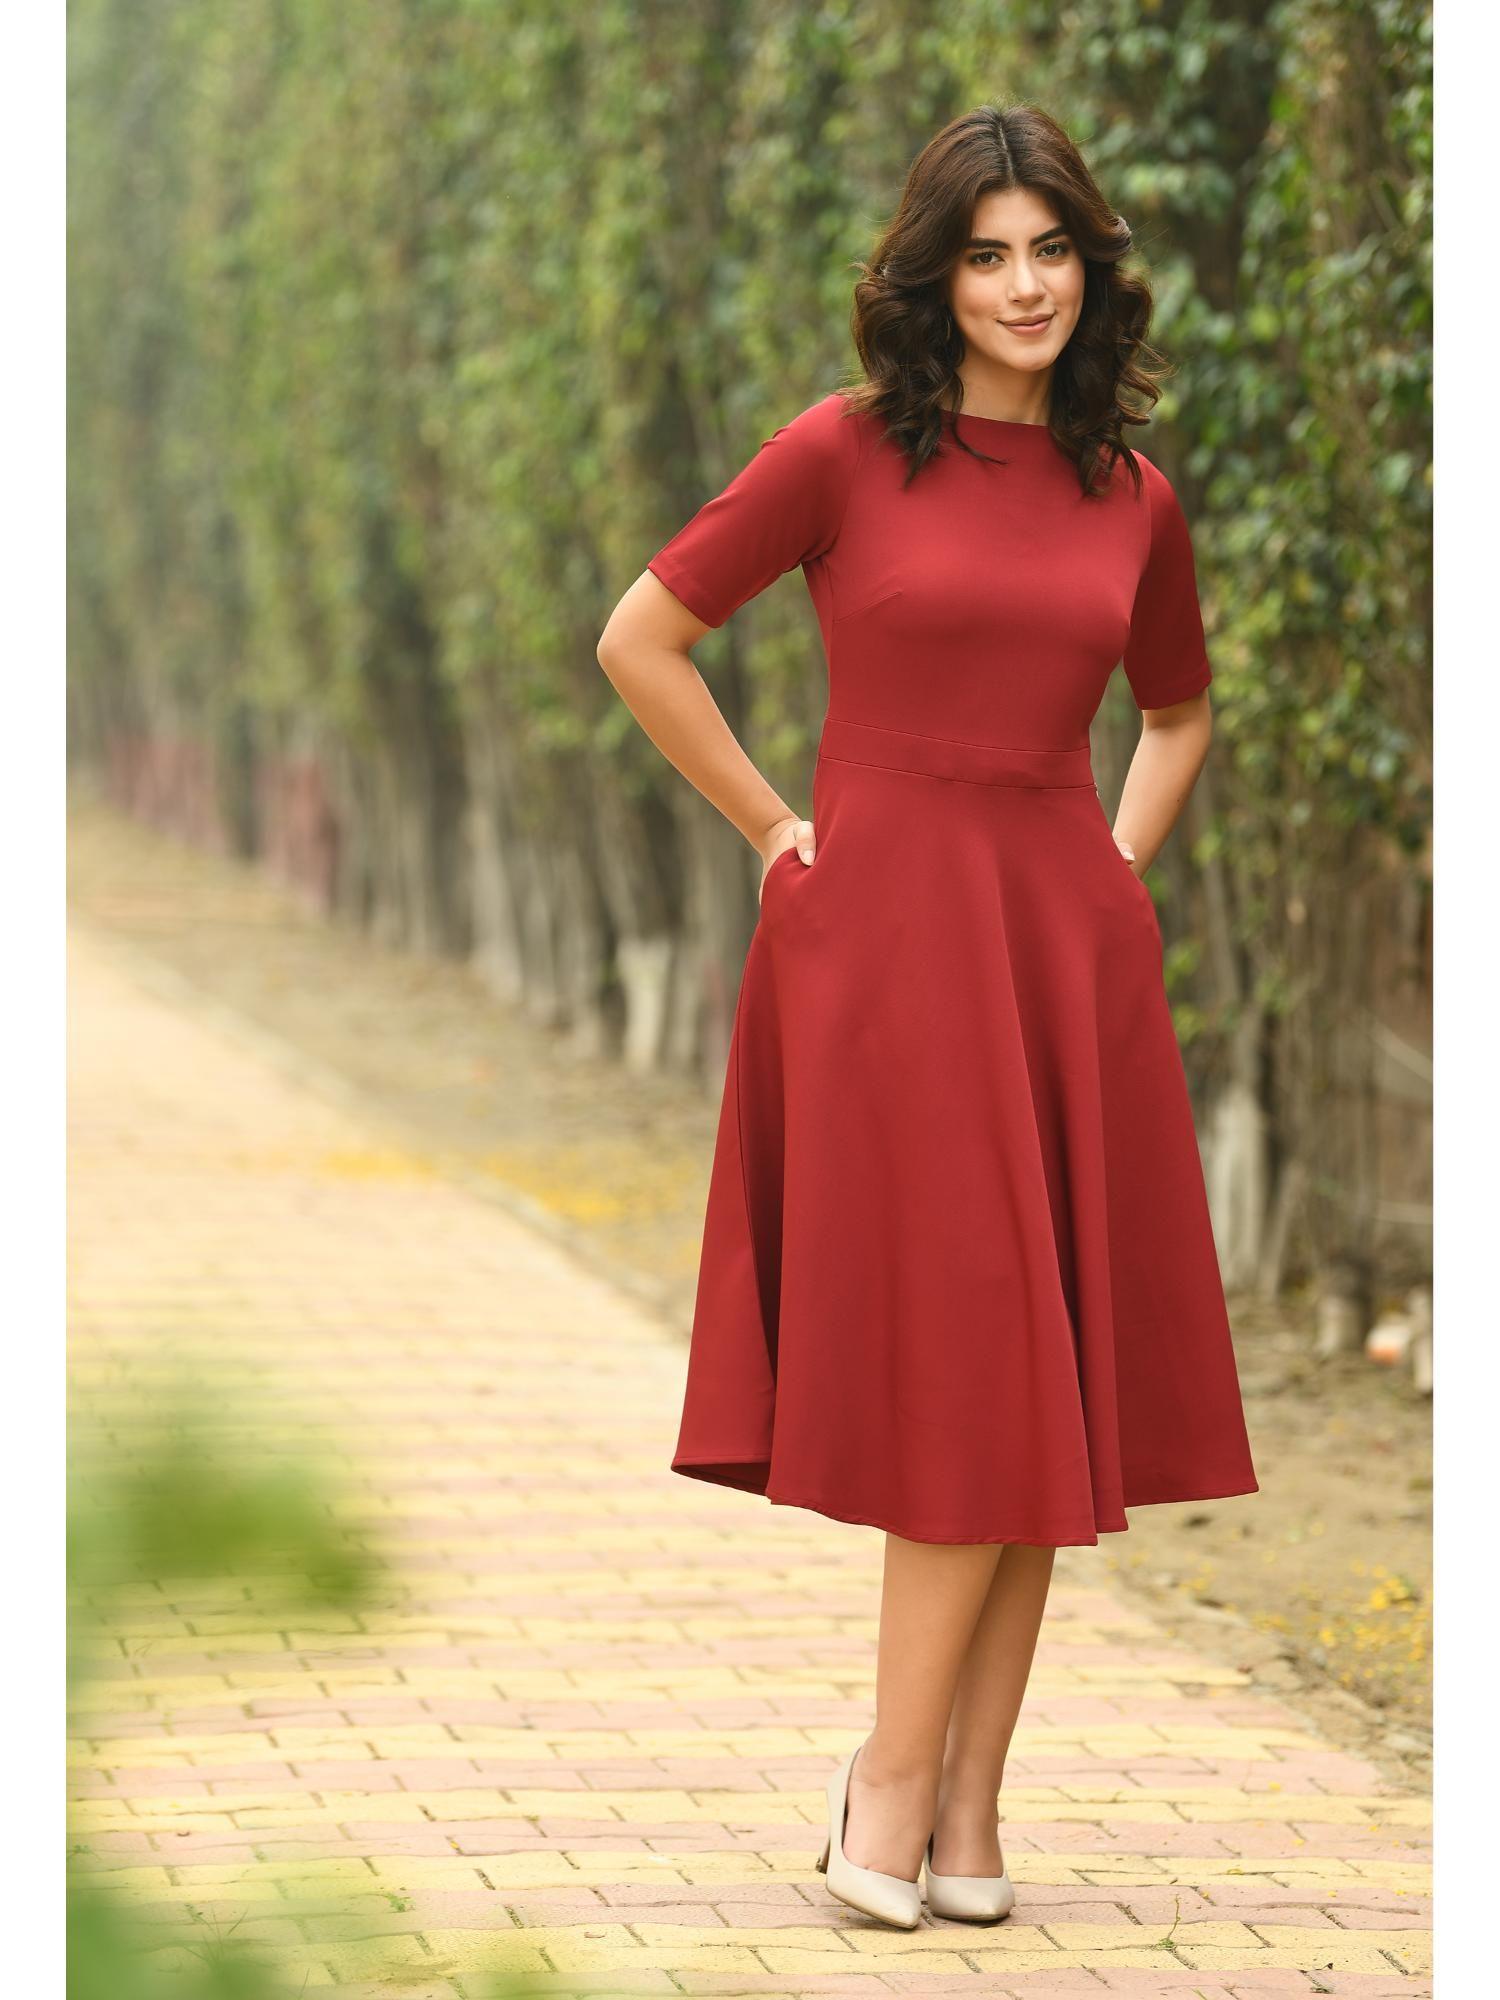 epitome classic a-line dress - red